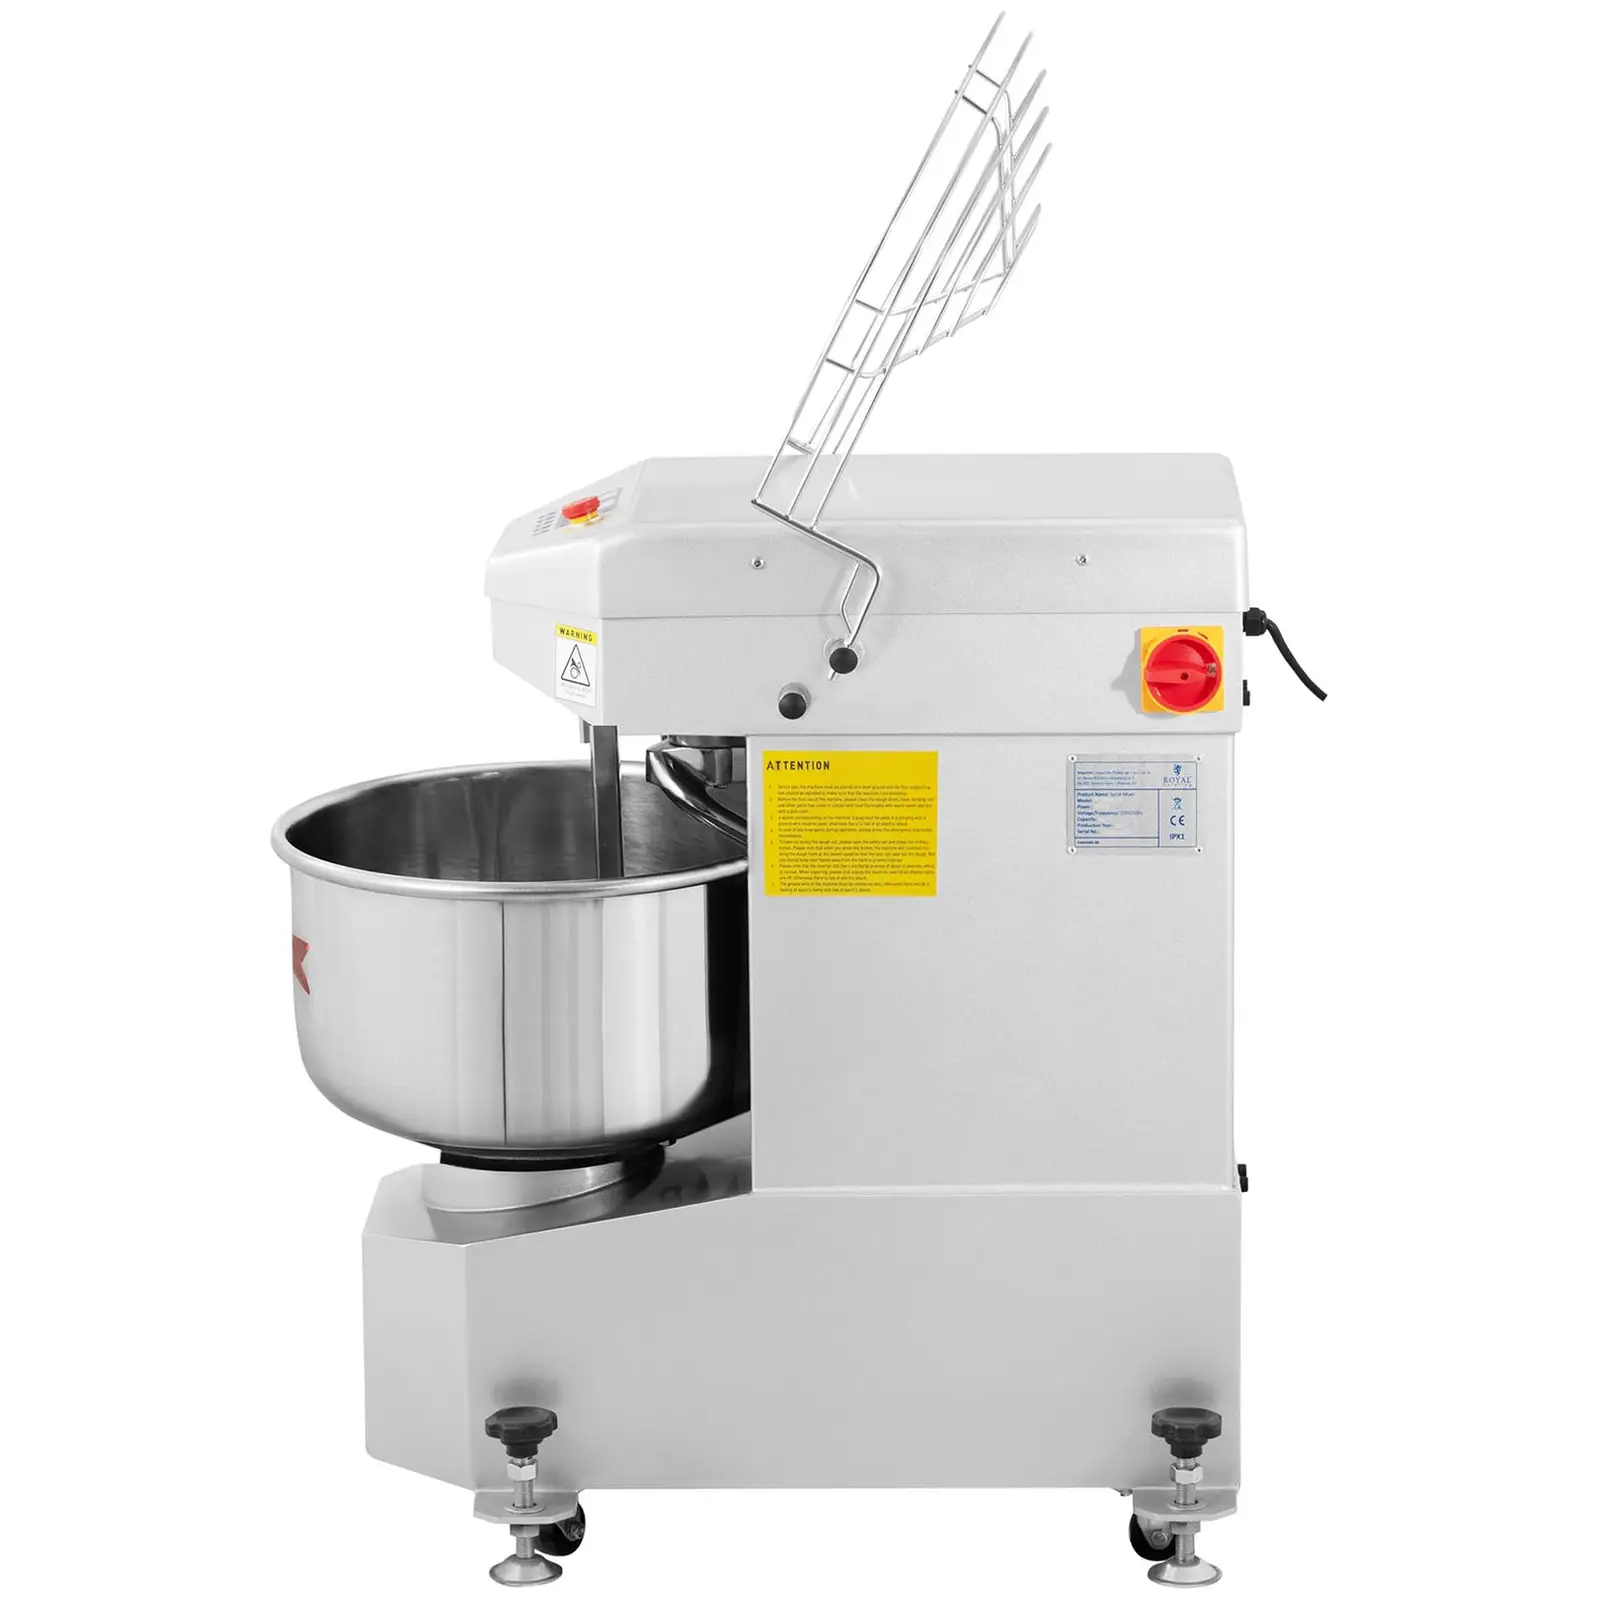 Batedeira profissional - 23 l - Royal Catering - 1300 W